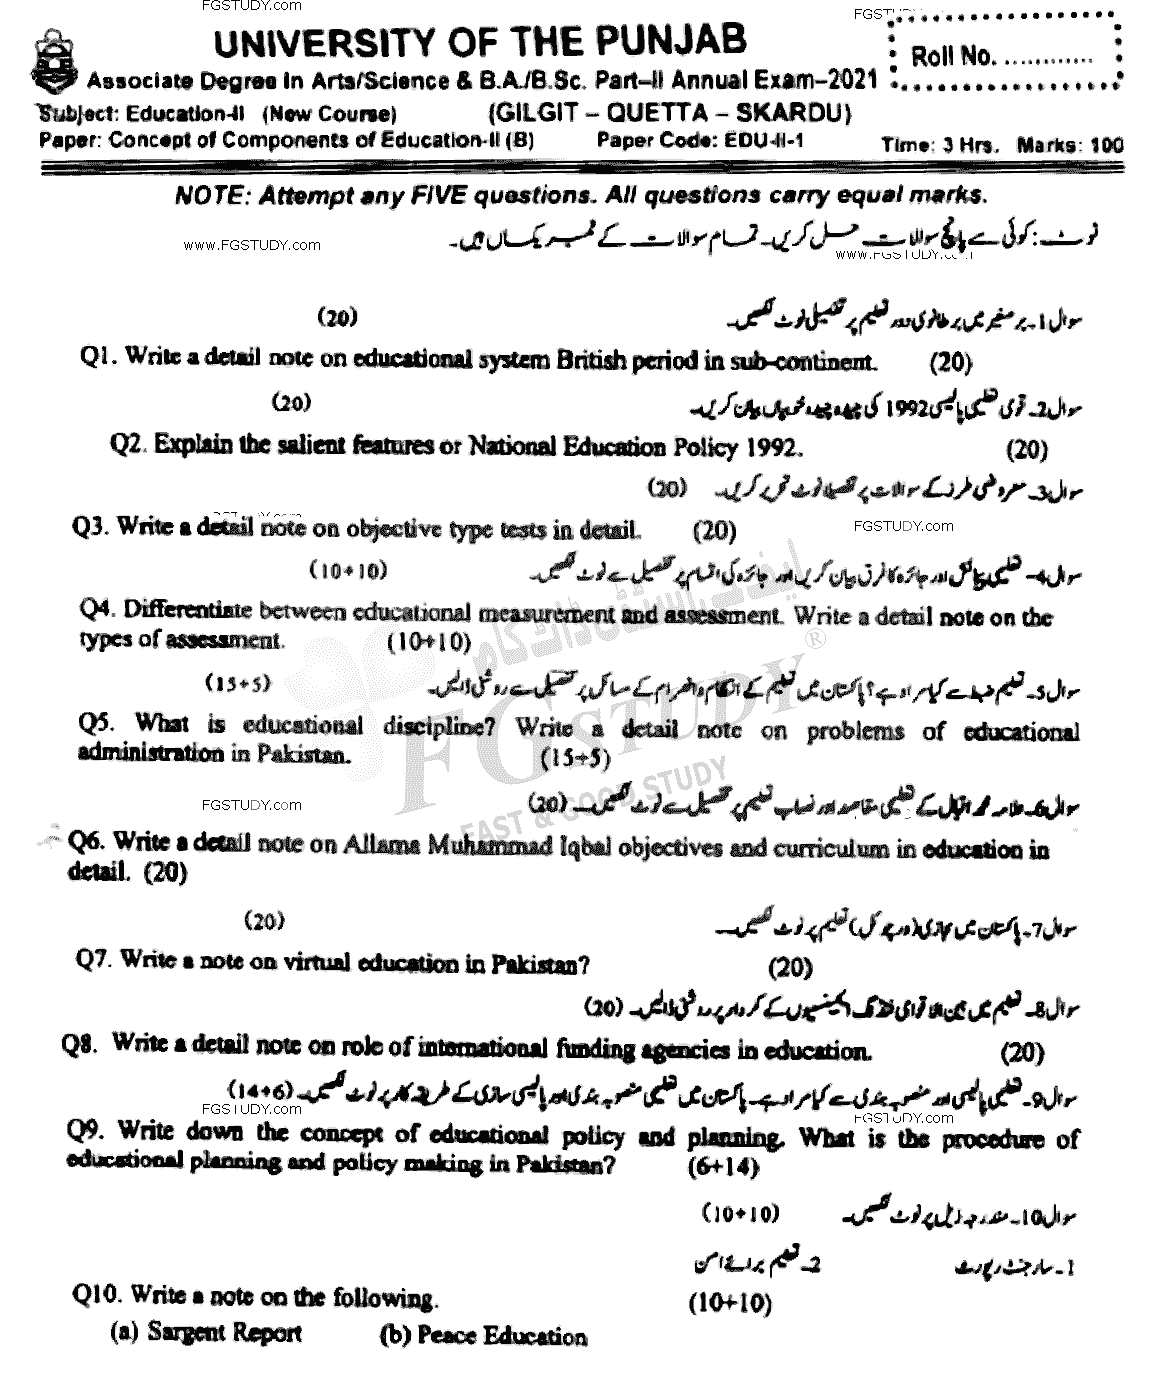 BSc Part 2 Education 2 Concept And Components Of Education Past Paper 2021 Punjab University Subjective